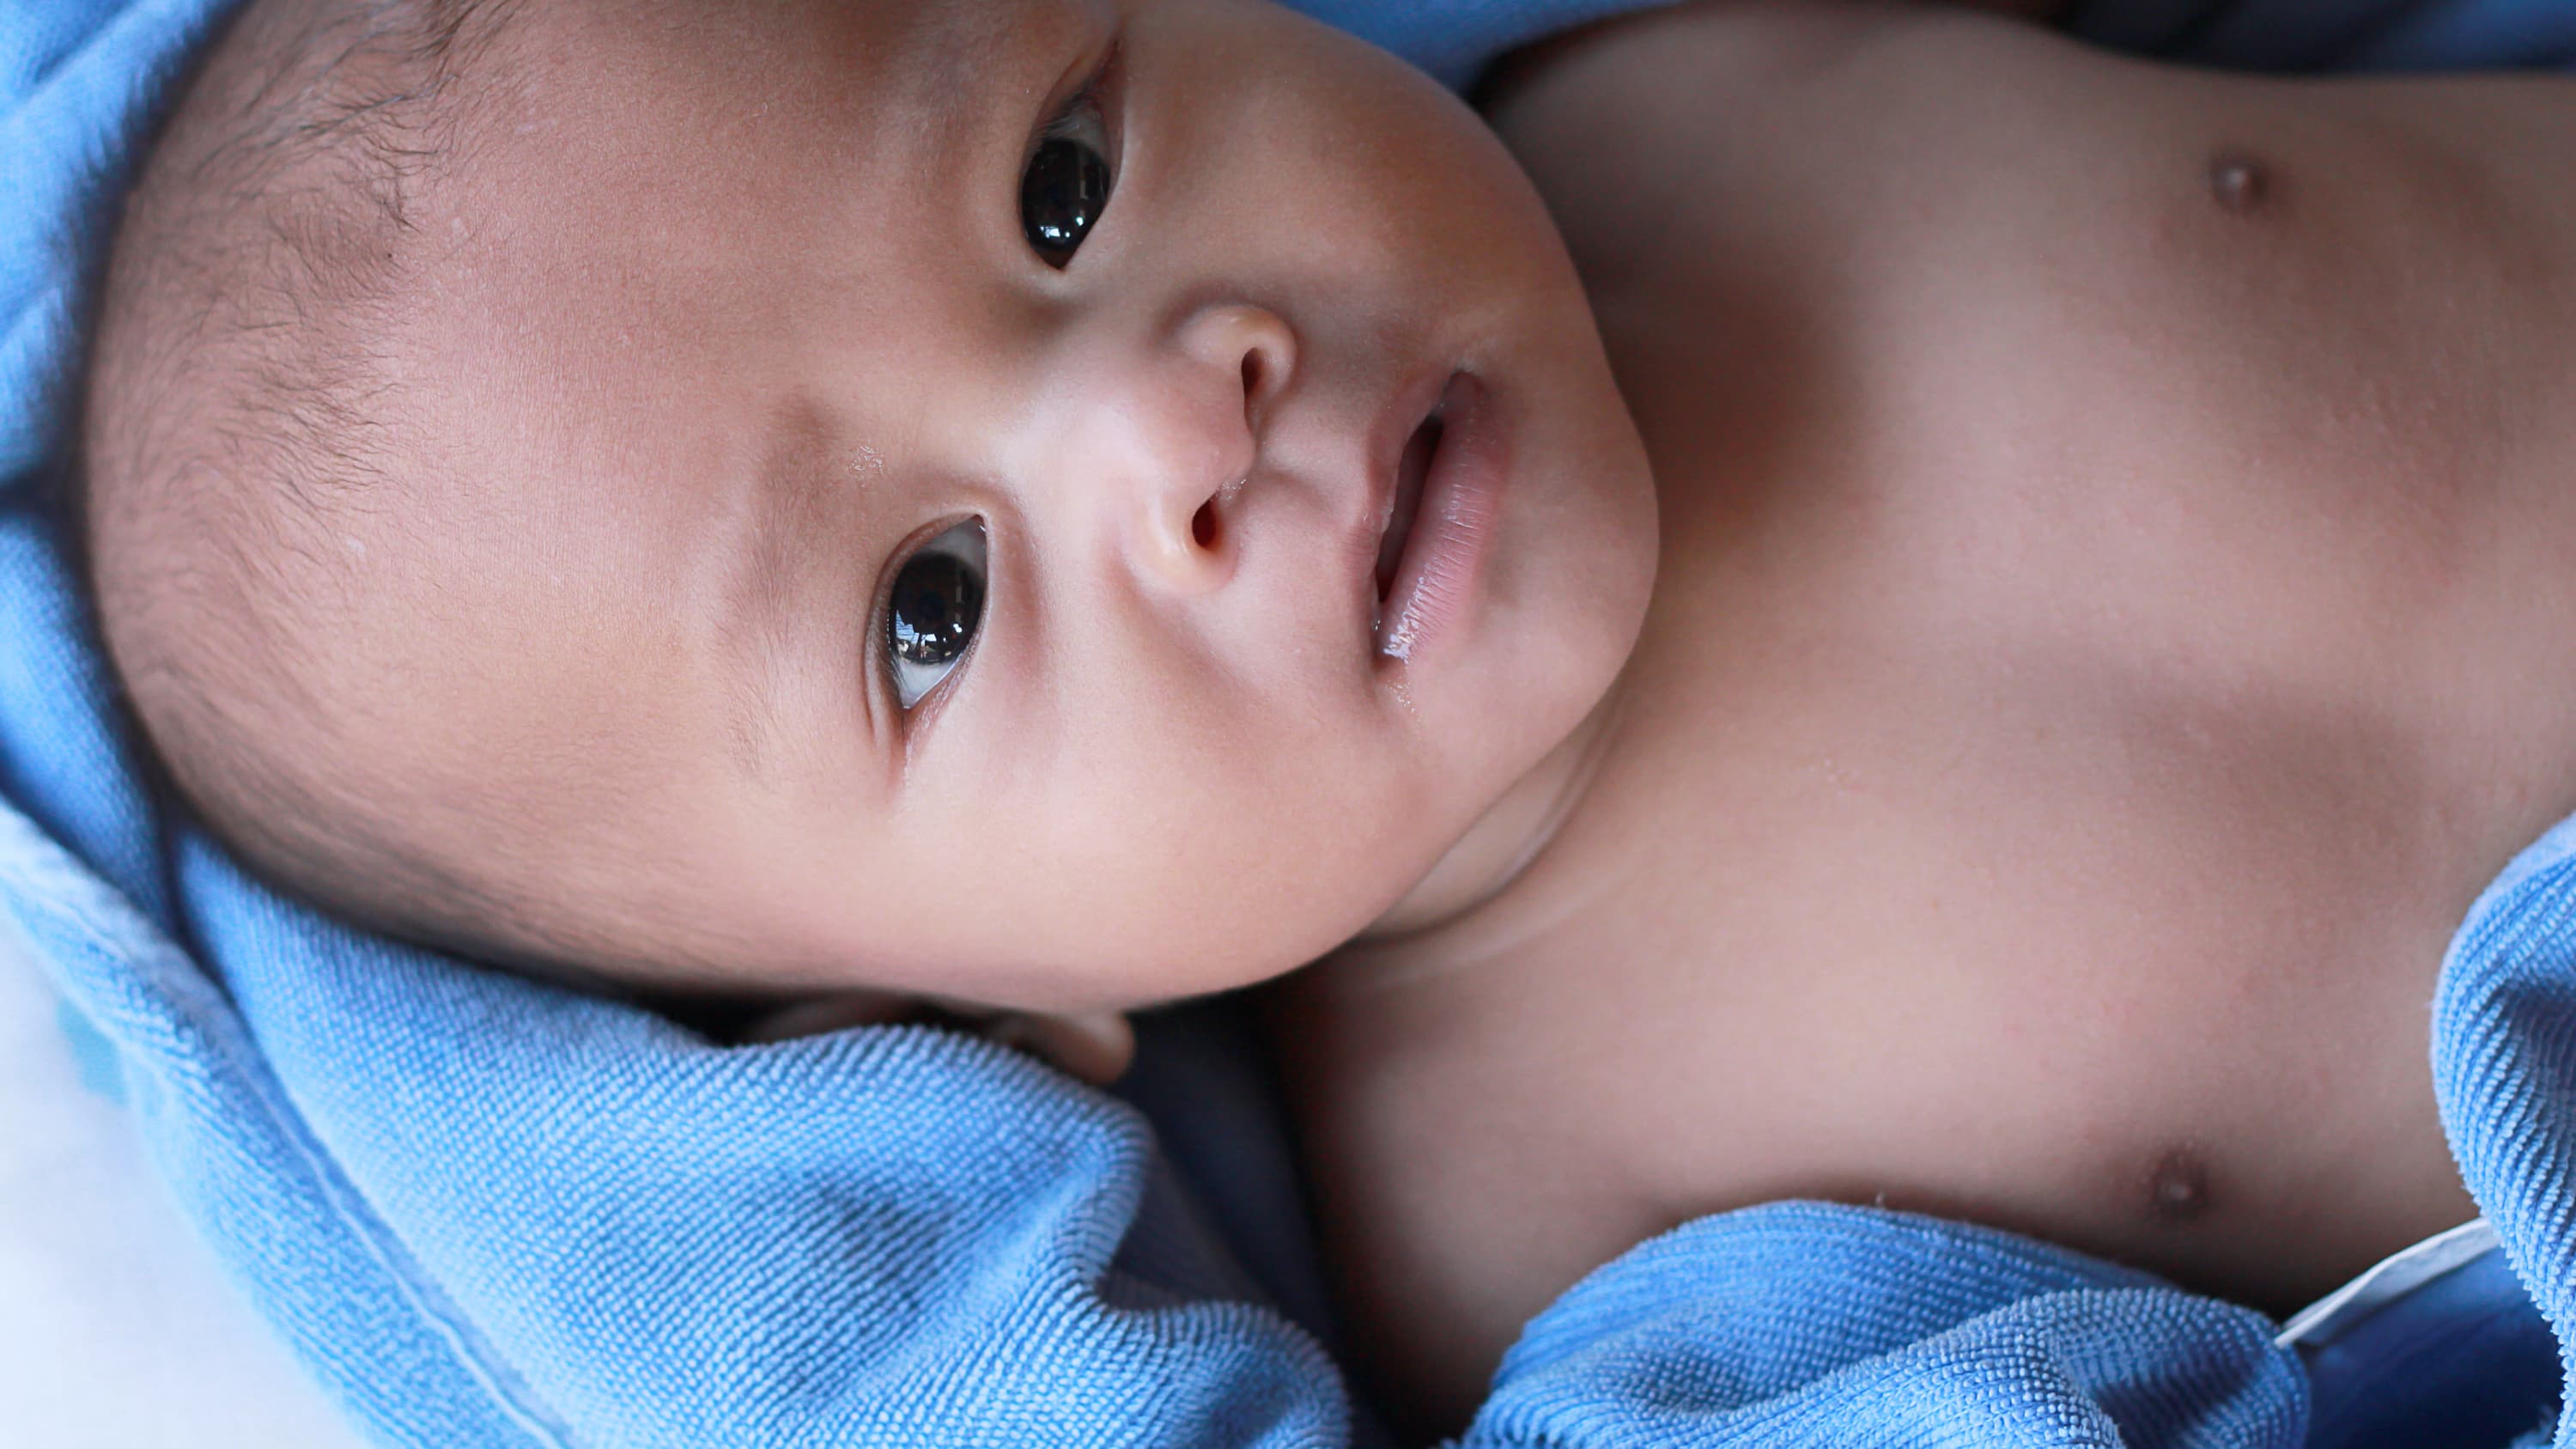 A baby with a fever rests on a blue blanket.